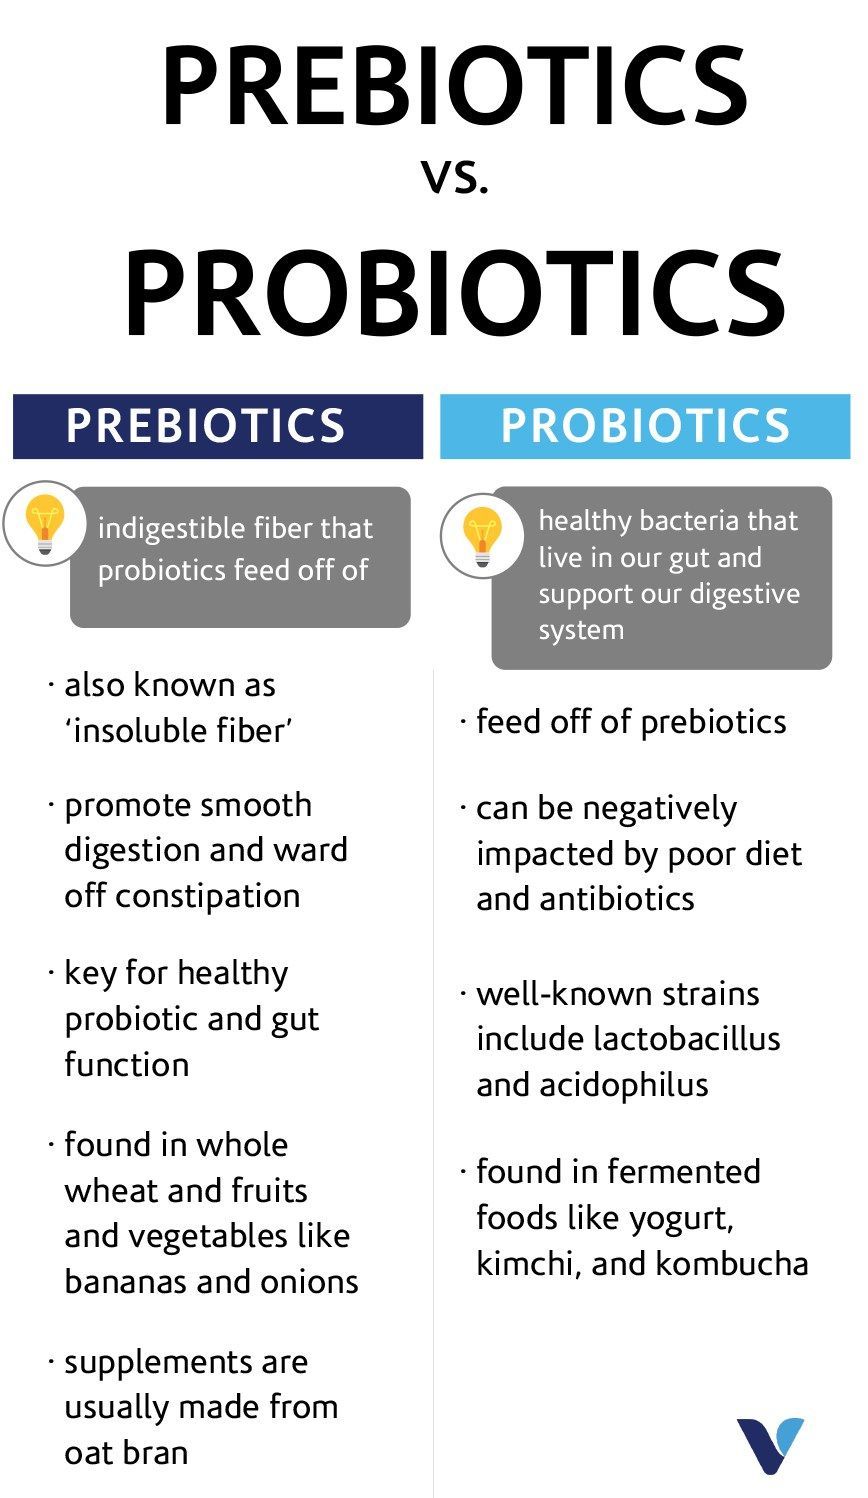 whats the difference between a prebiotic and a probiotic ...